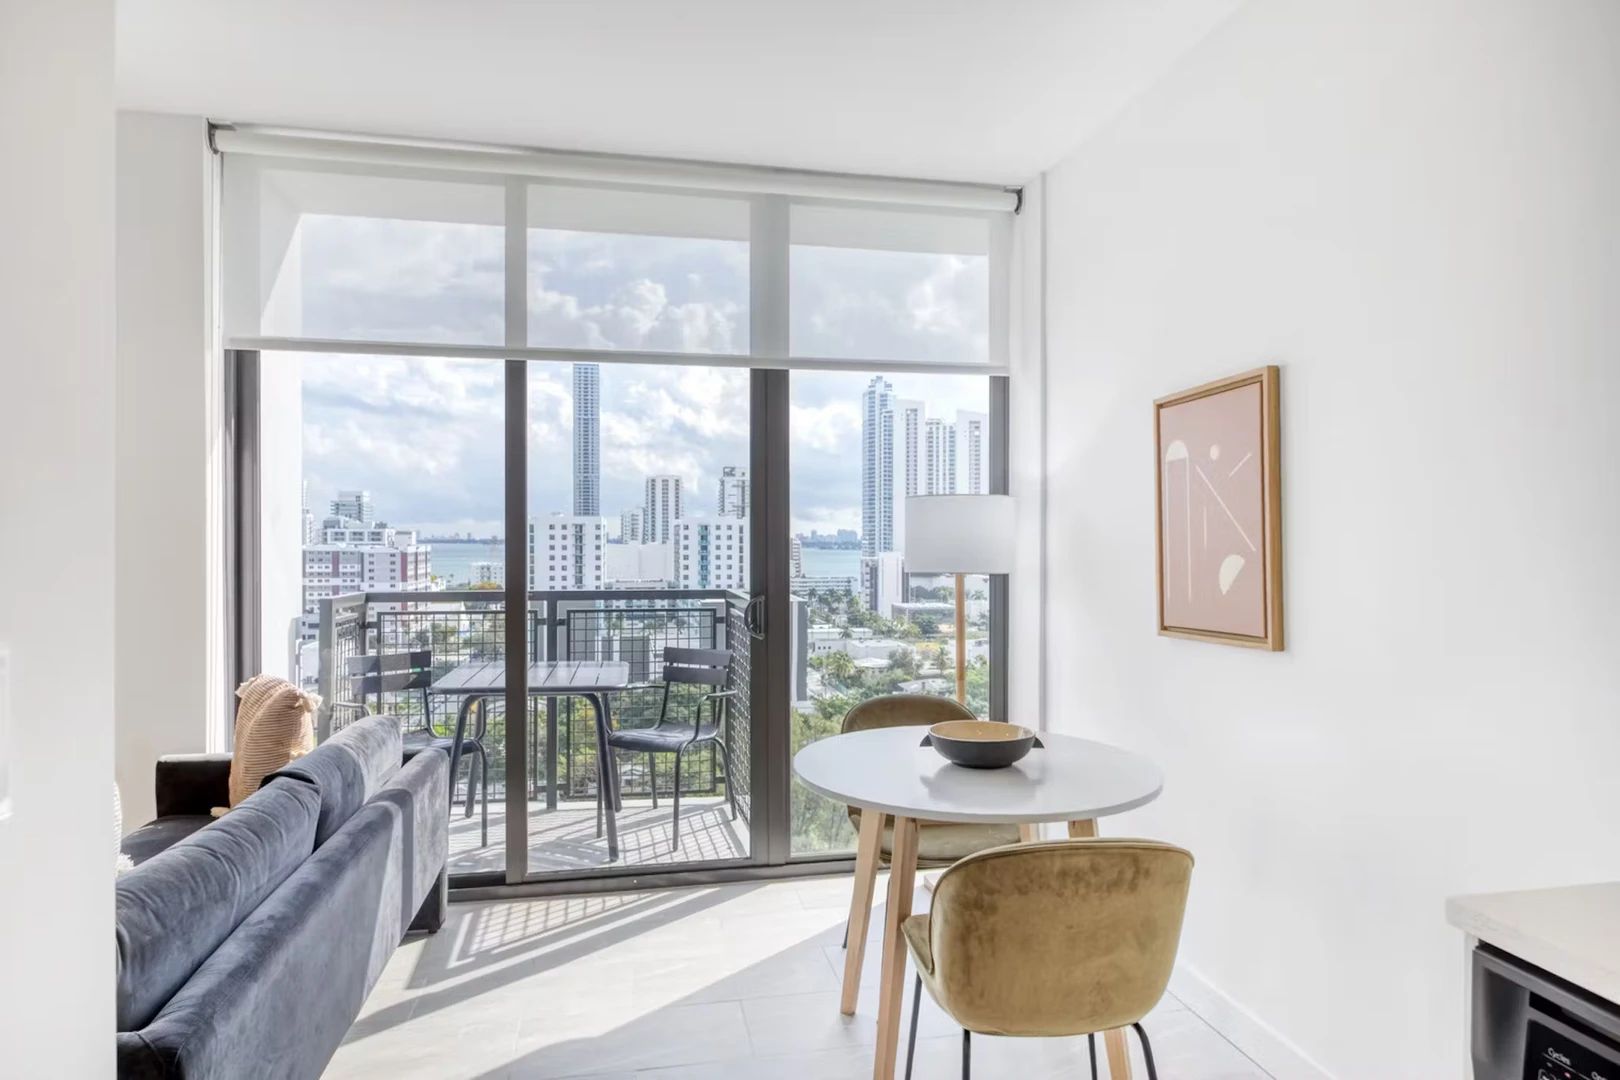 Accommodation in the centre of Miami